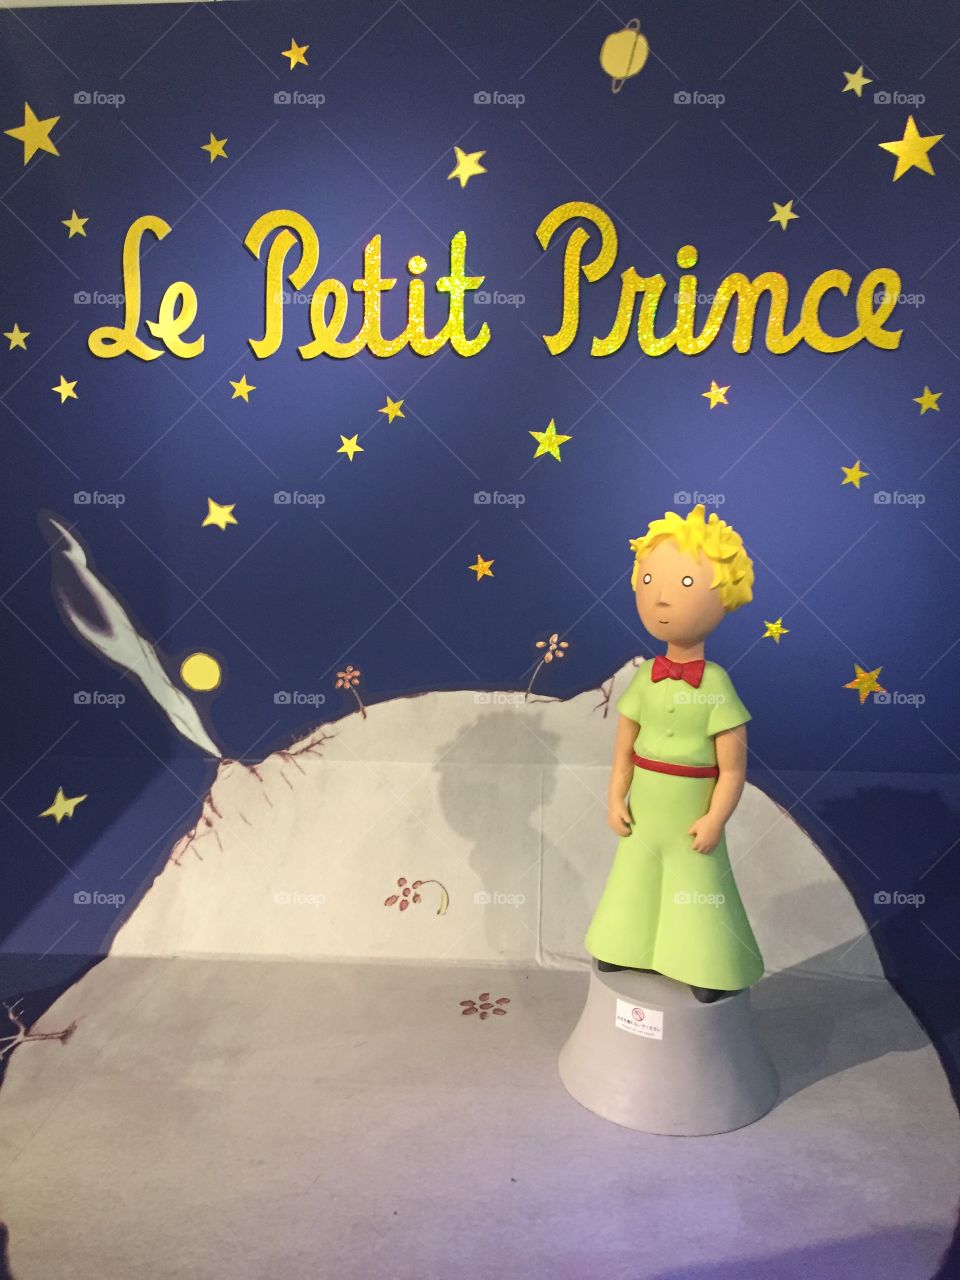 A life size statue of The Little Prince